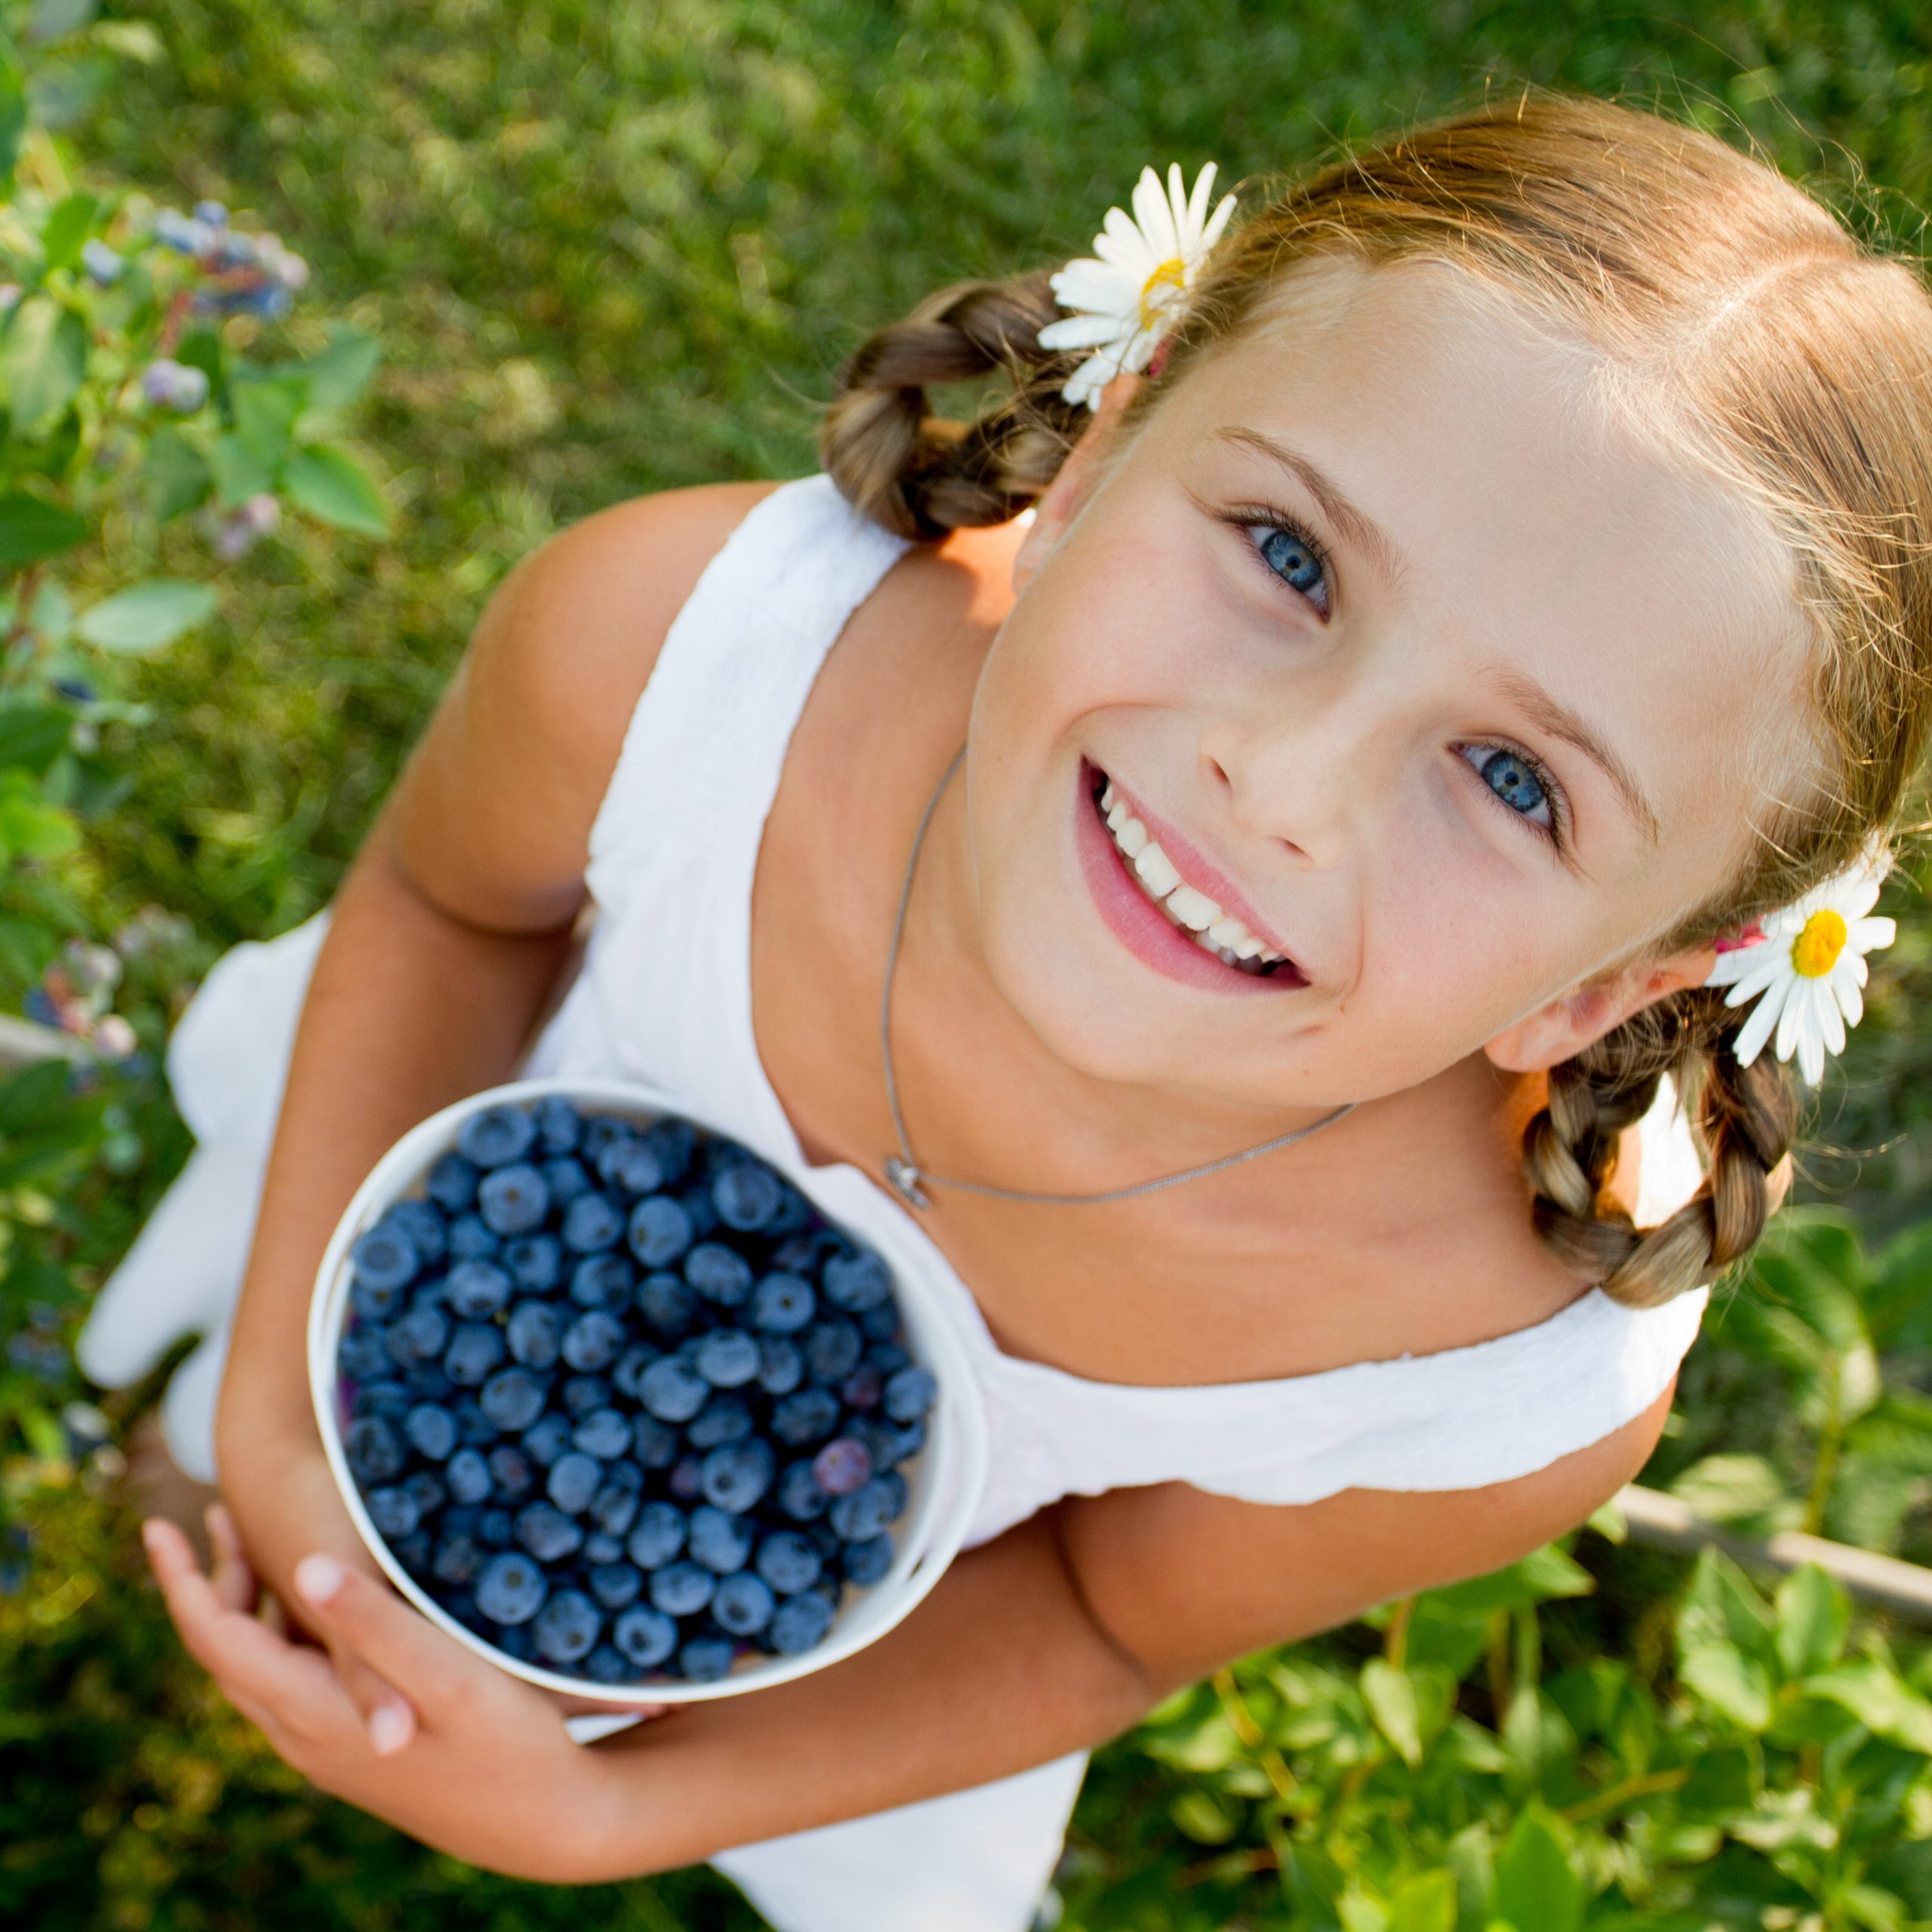 u-pick blueberries fresh off the bush can be picked at the blueberryhill fields during an original orlando tours visit